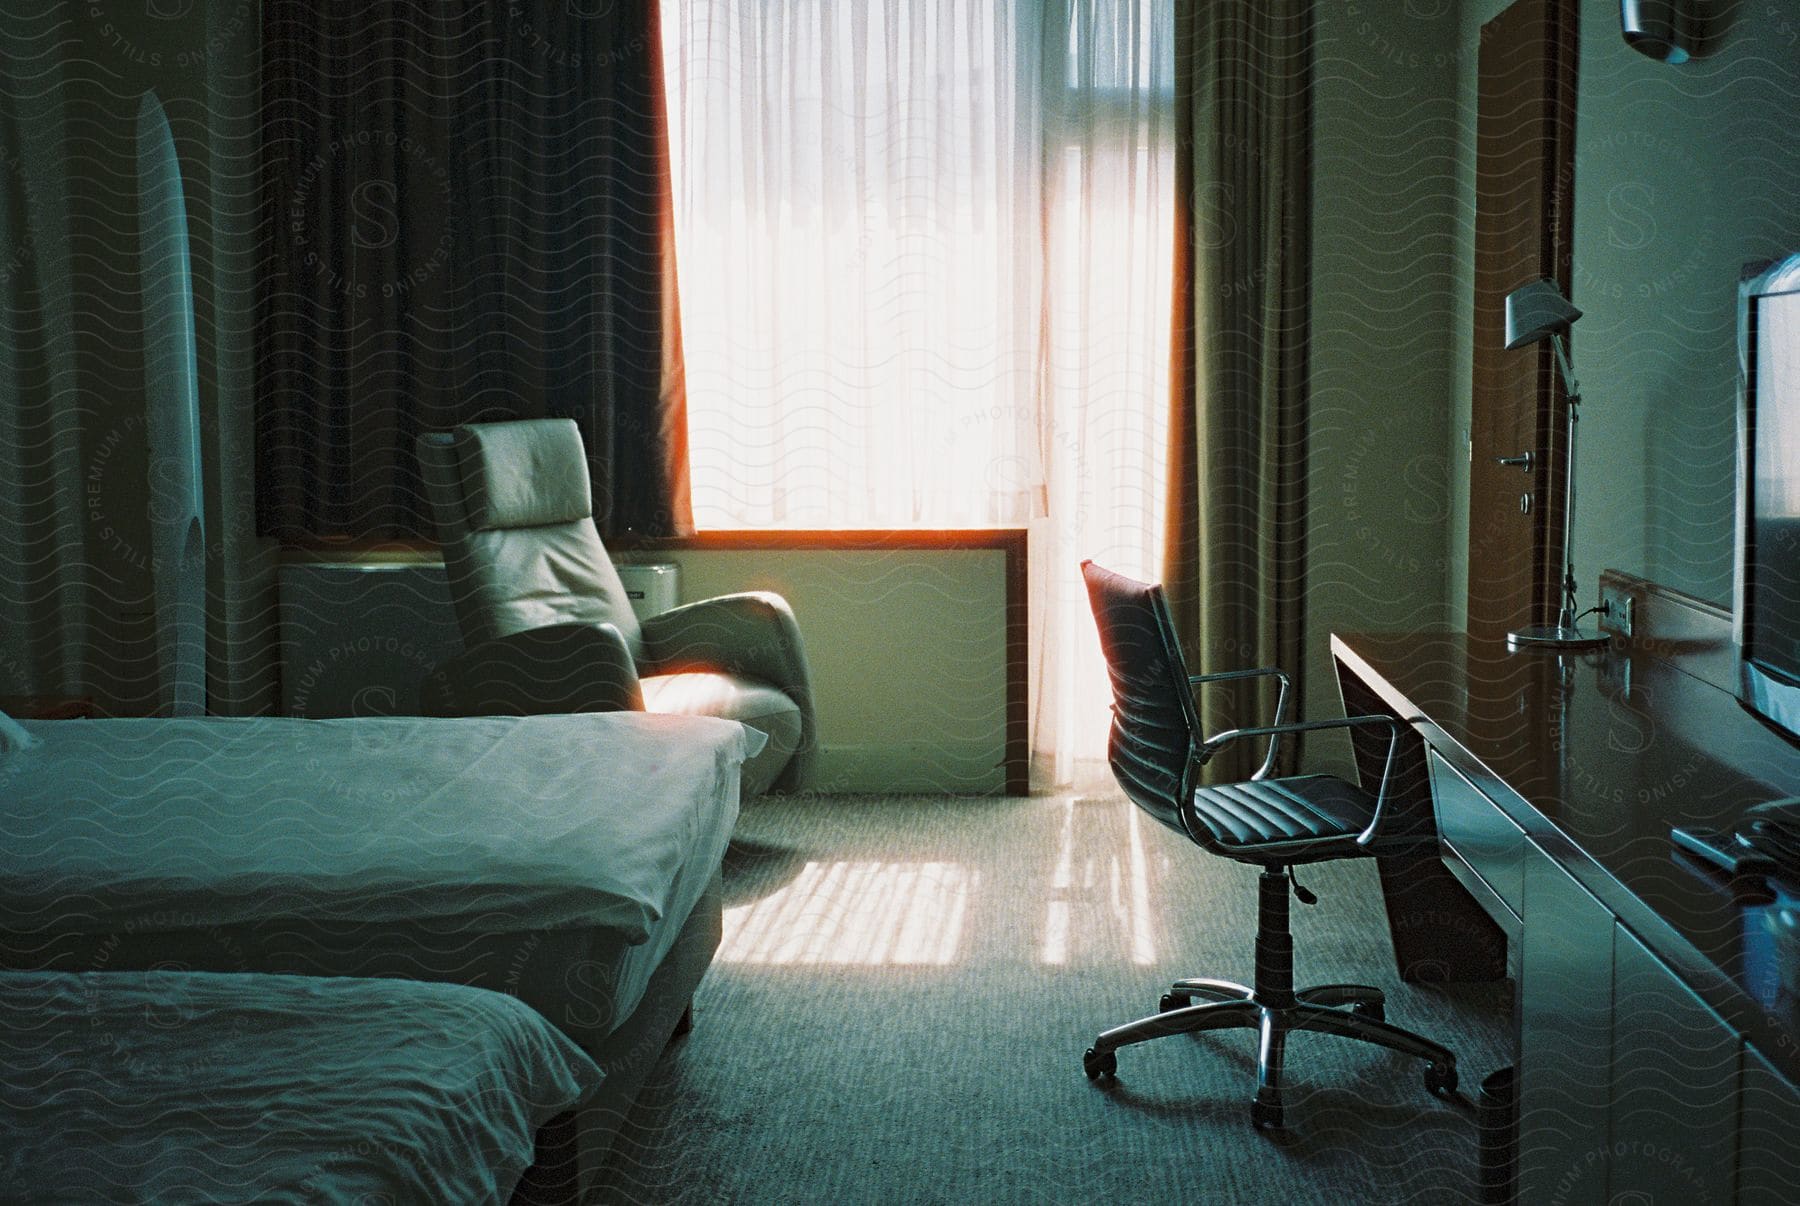 A hotel room with sunlight streaming in through the window